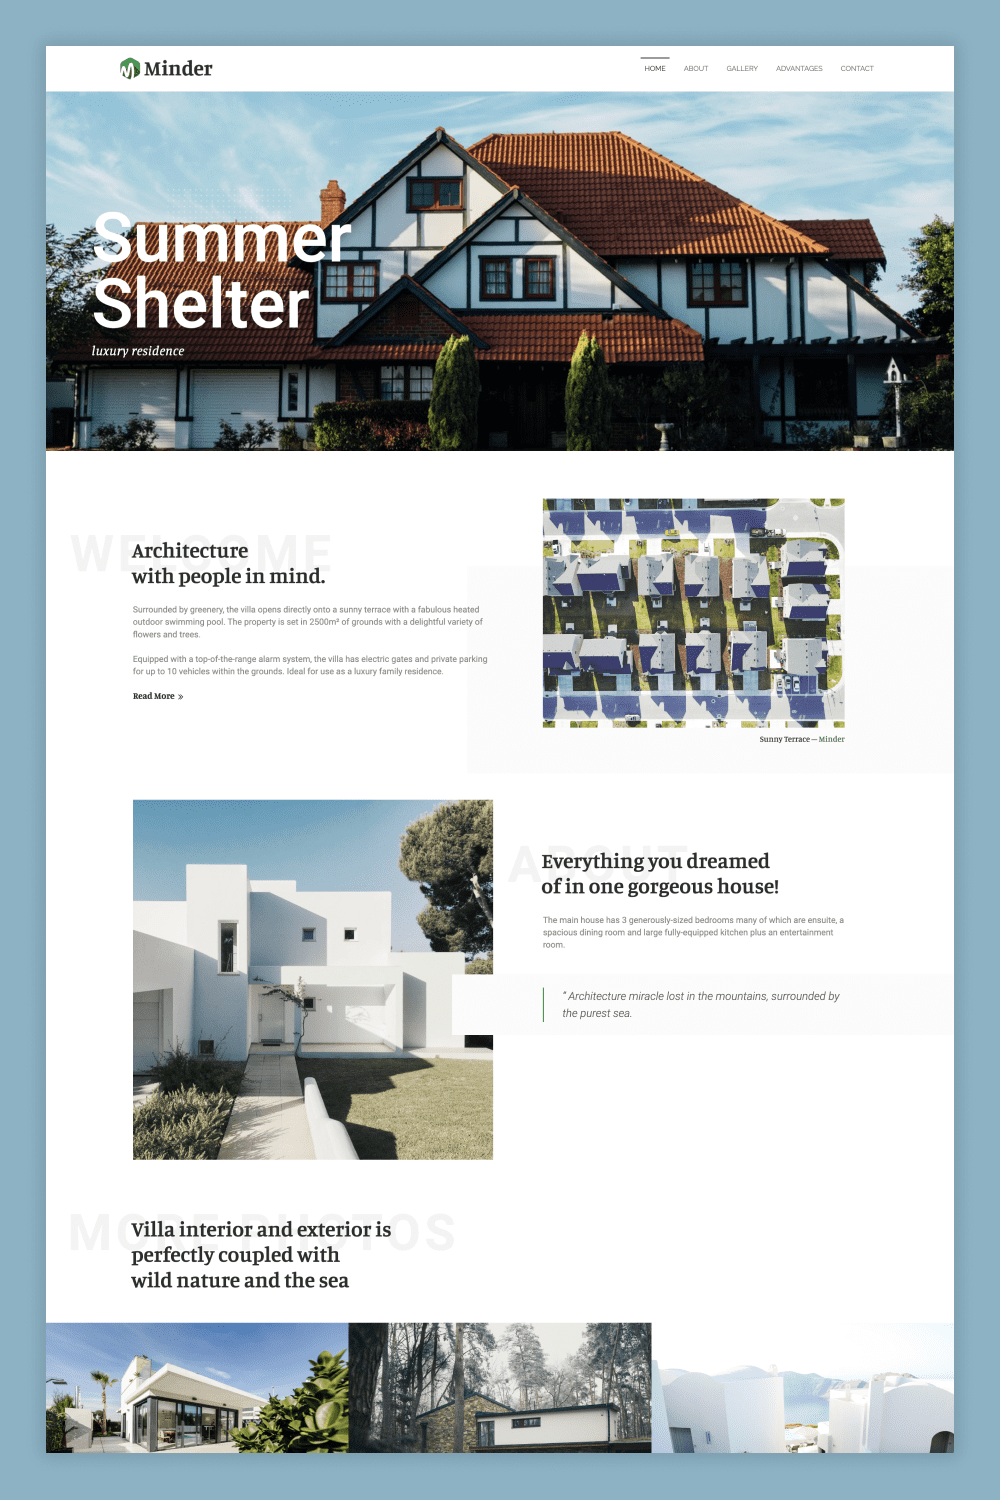 Screenshot of the main page of the site with photos of country houses and small text.